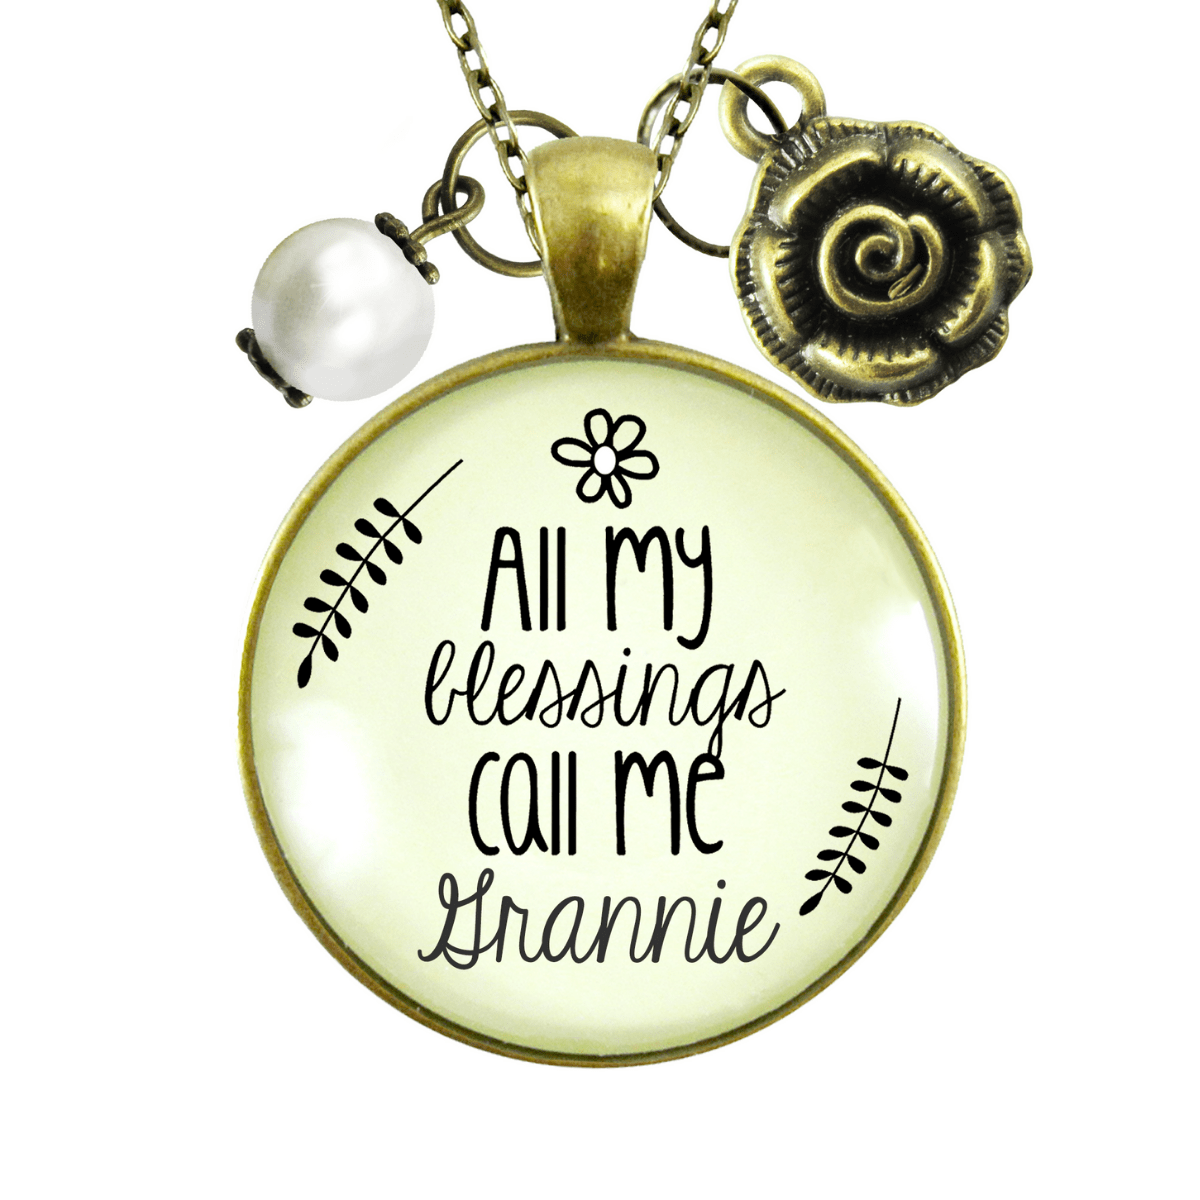 Gutsy Goodness Grannie Necklace All My Blessings Meaningful Grandma Gift Charm Jewelry 24" - Gutsy Goodness;Grannie Necklace All My Blessings Meaningful Grandma Gift Charm Jewelry 24" - Gutsy Goodness Handmade Jewelry Gifts